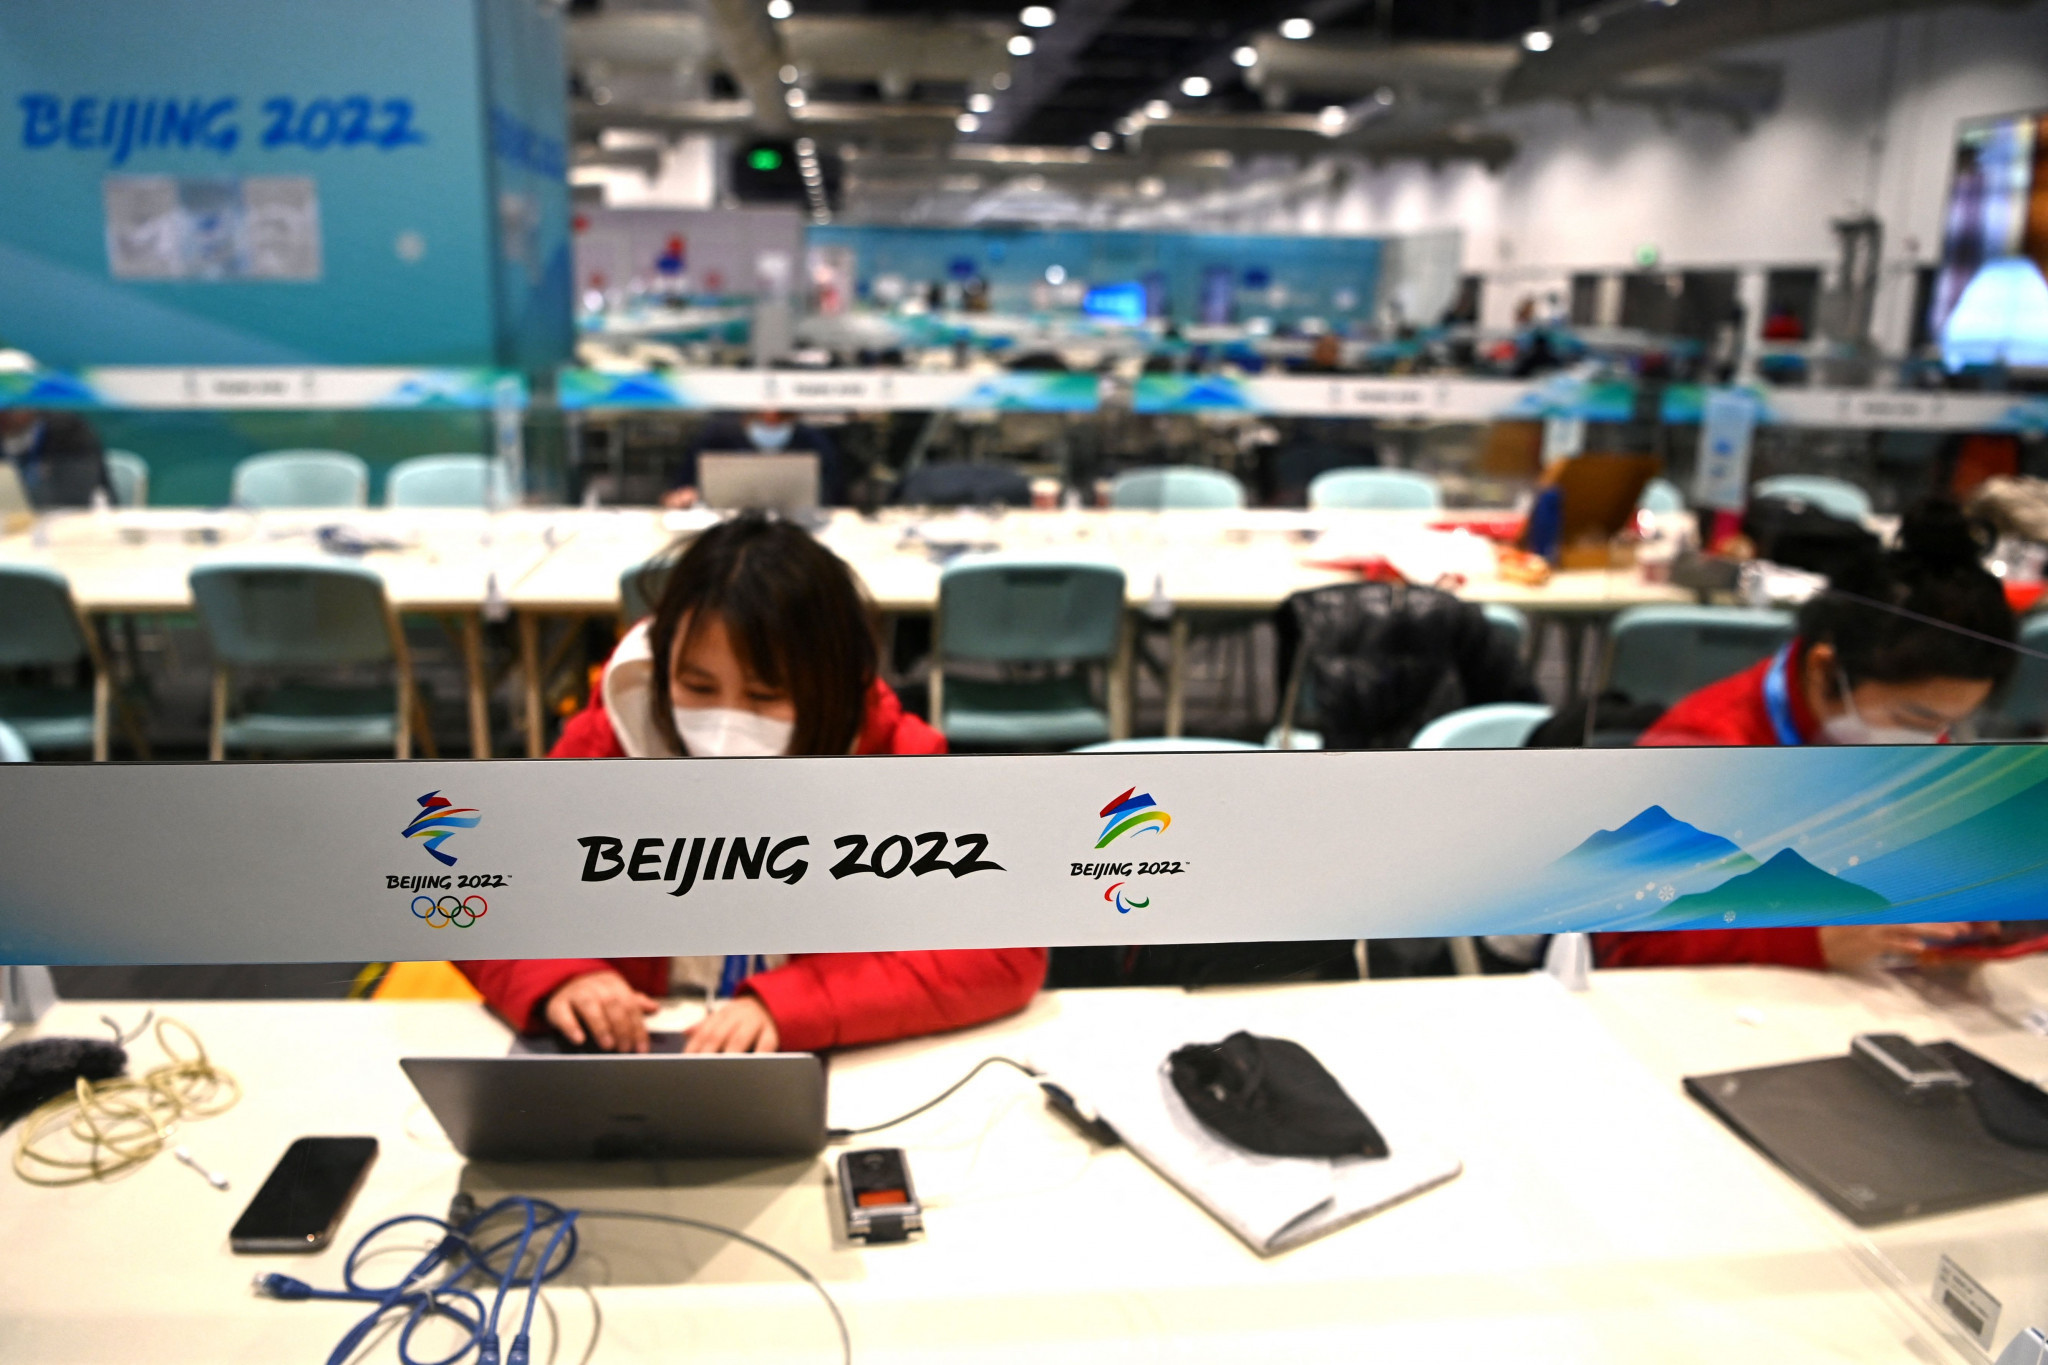 Concerns have been raised over the ability of athletes to speak out and journalists to report freely during Beijing 2022 ©Getty Images